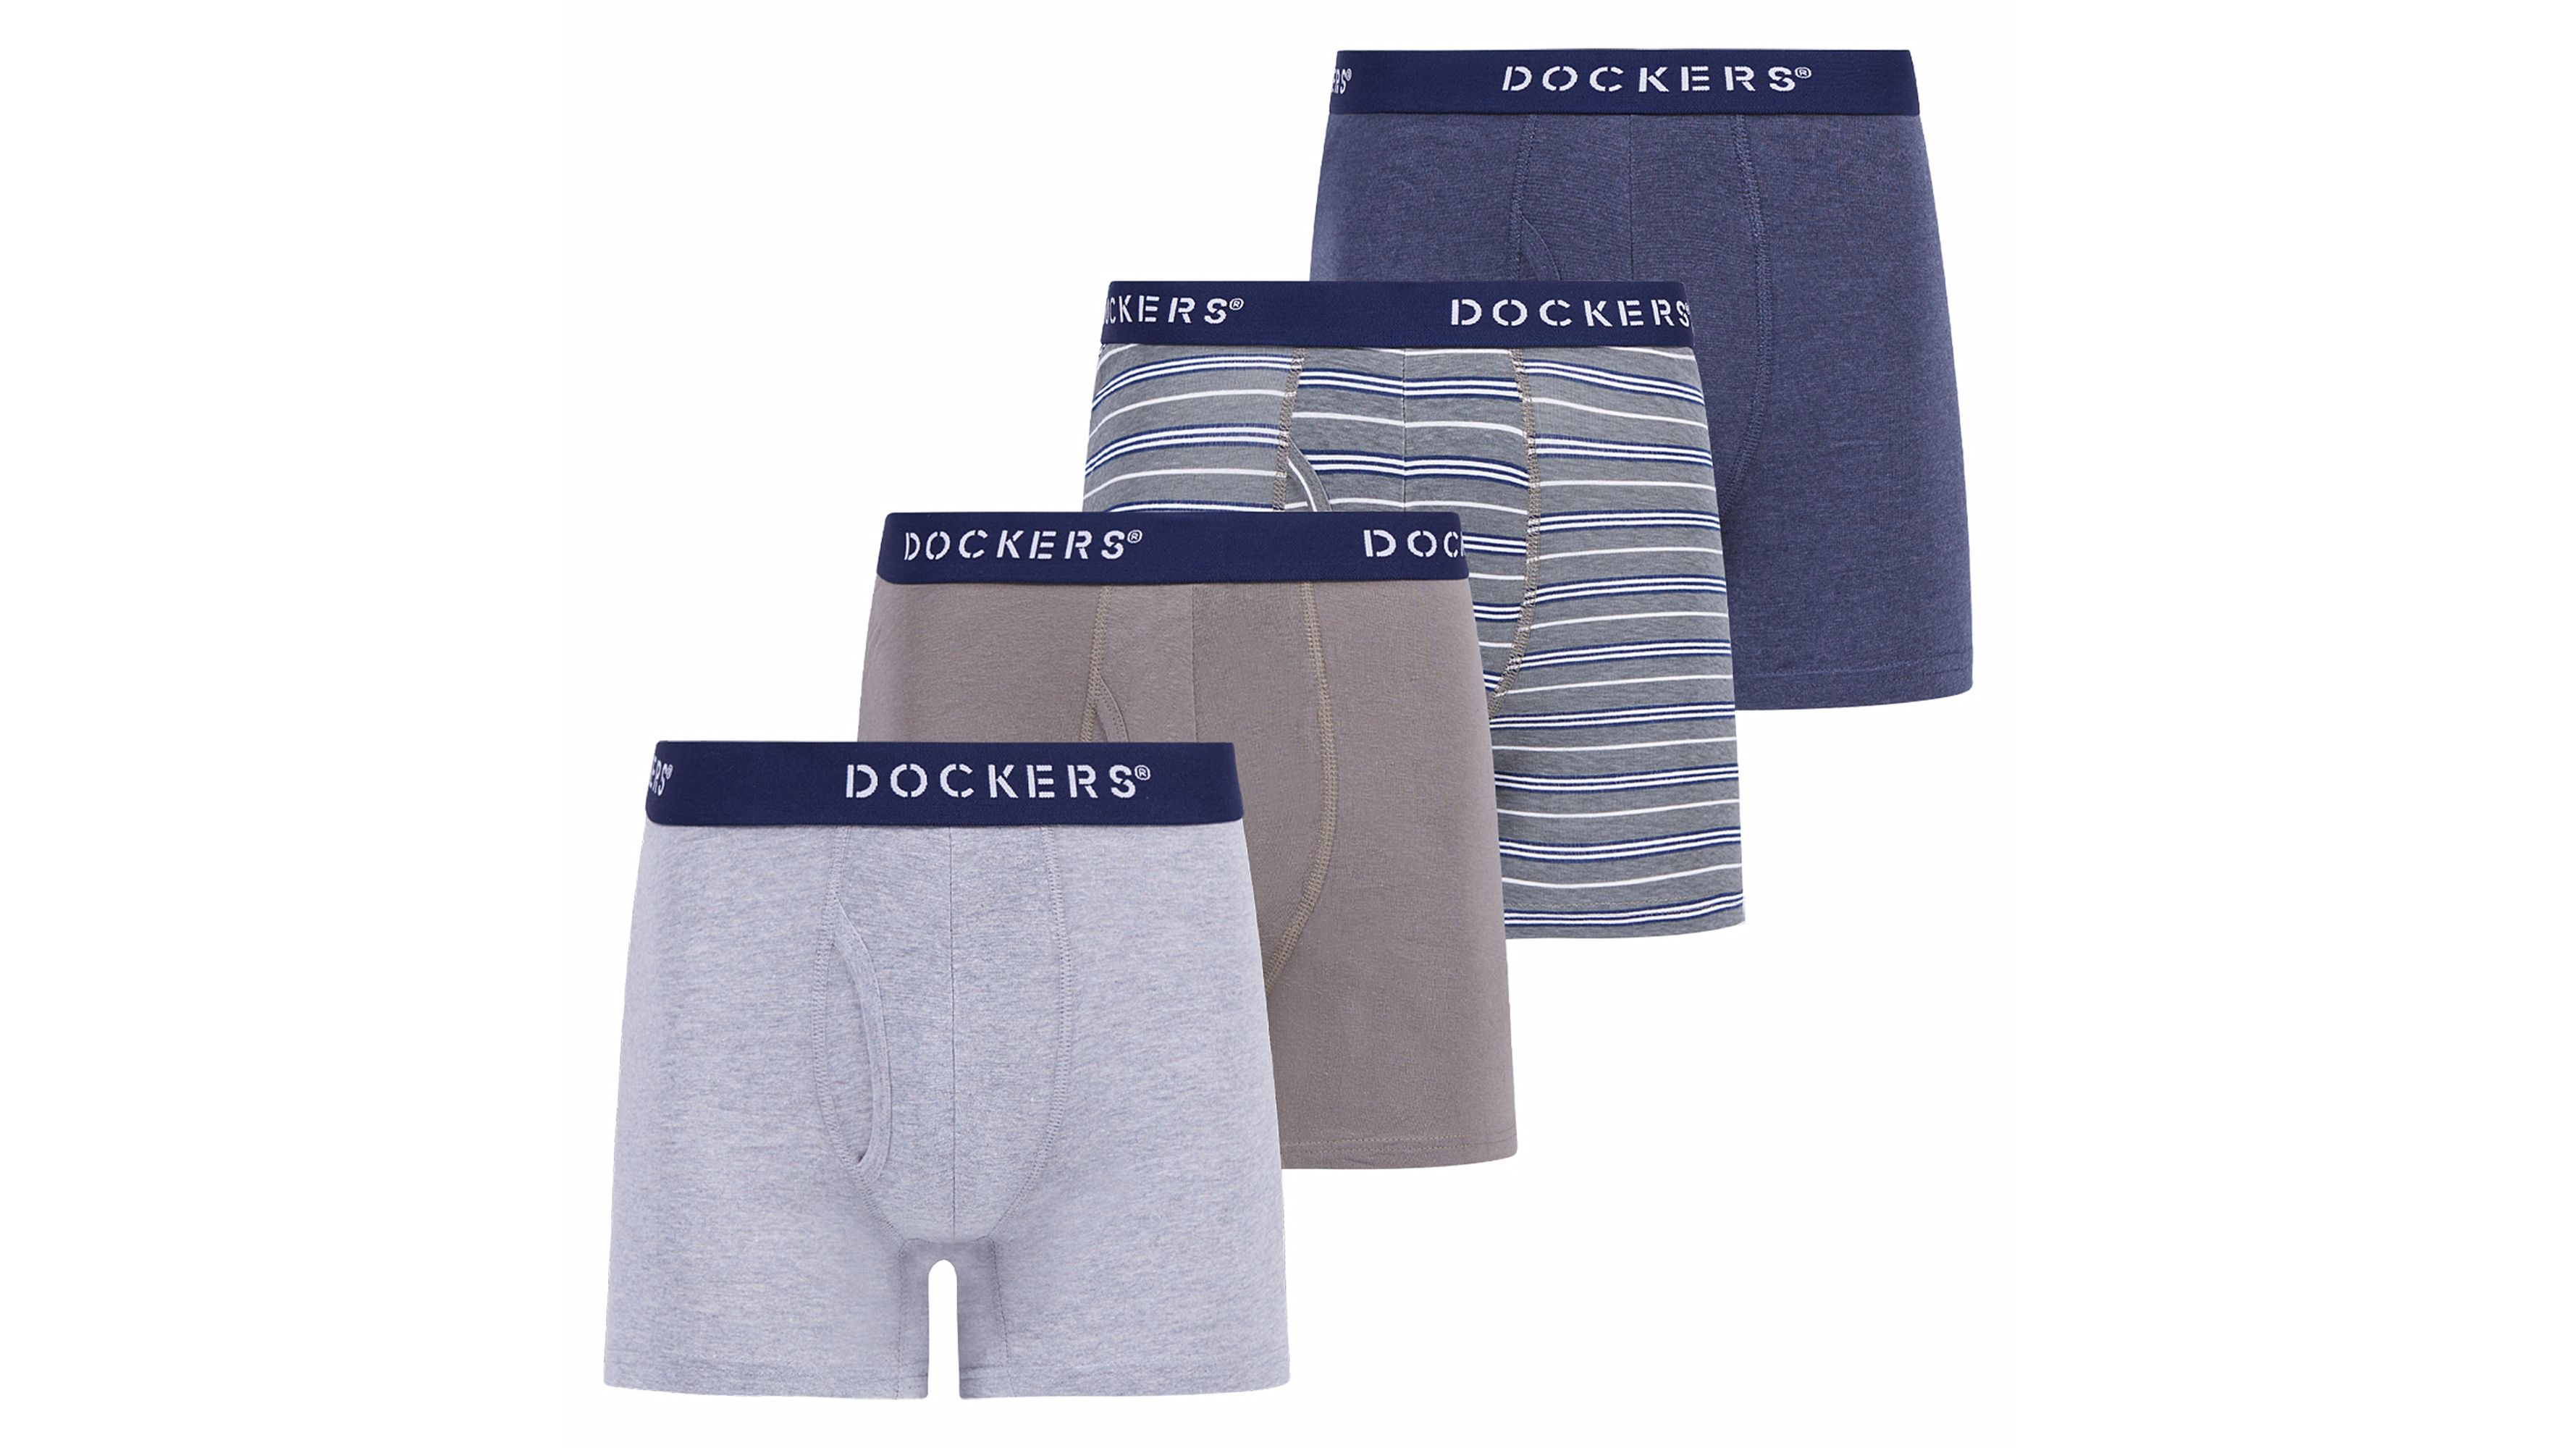 LIMITED EDITION LOGO STRETCH BOXER BRIEFS, 3-PACK